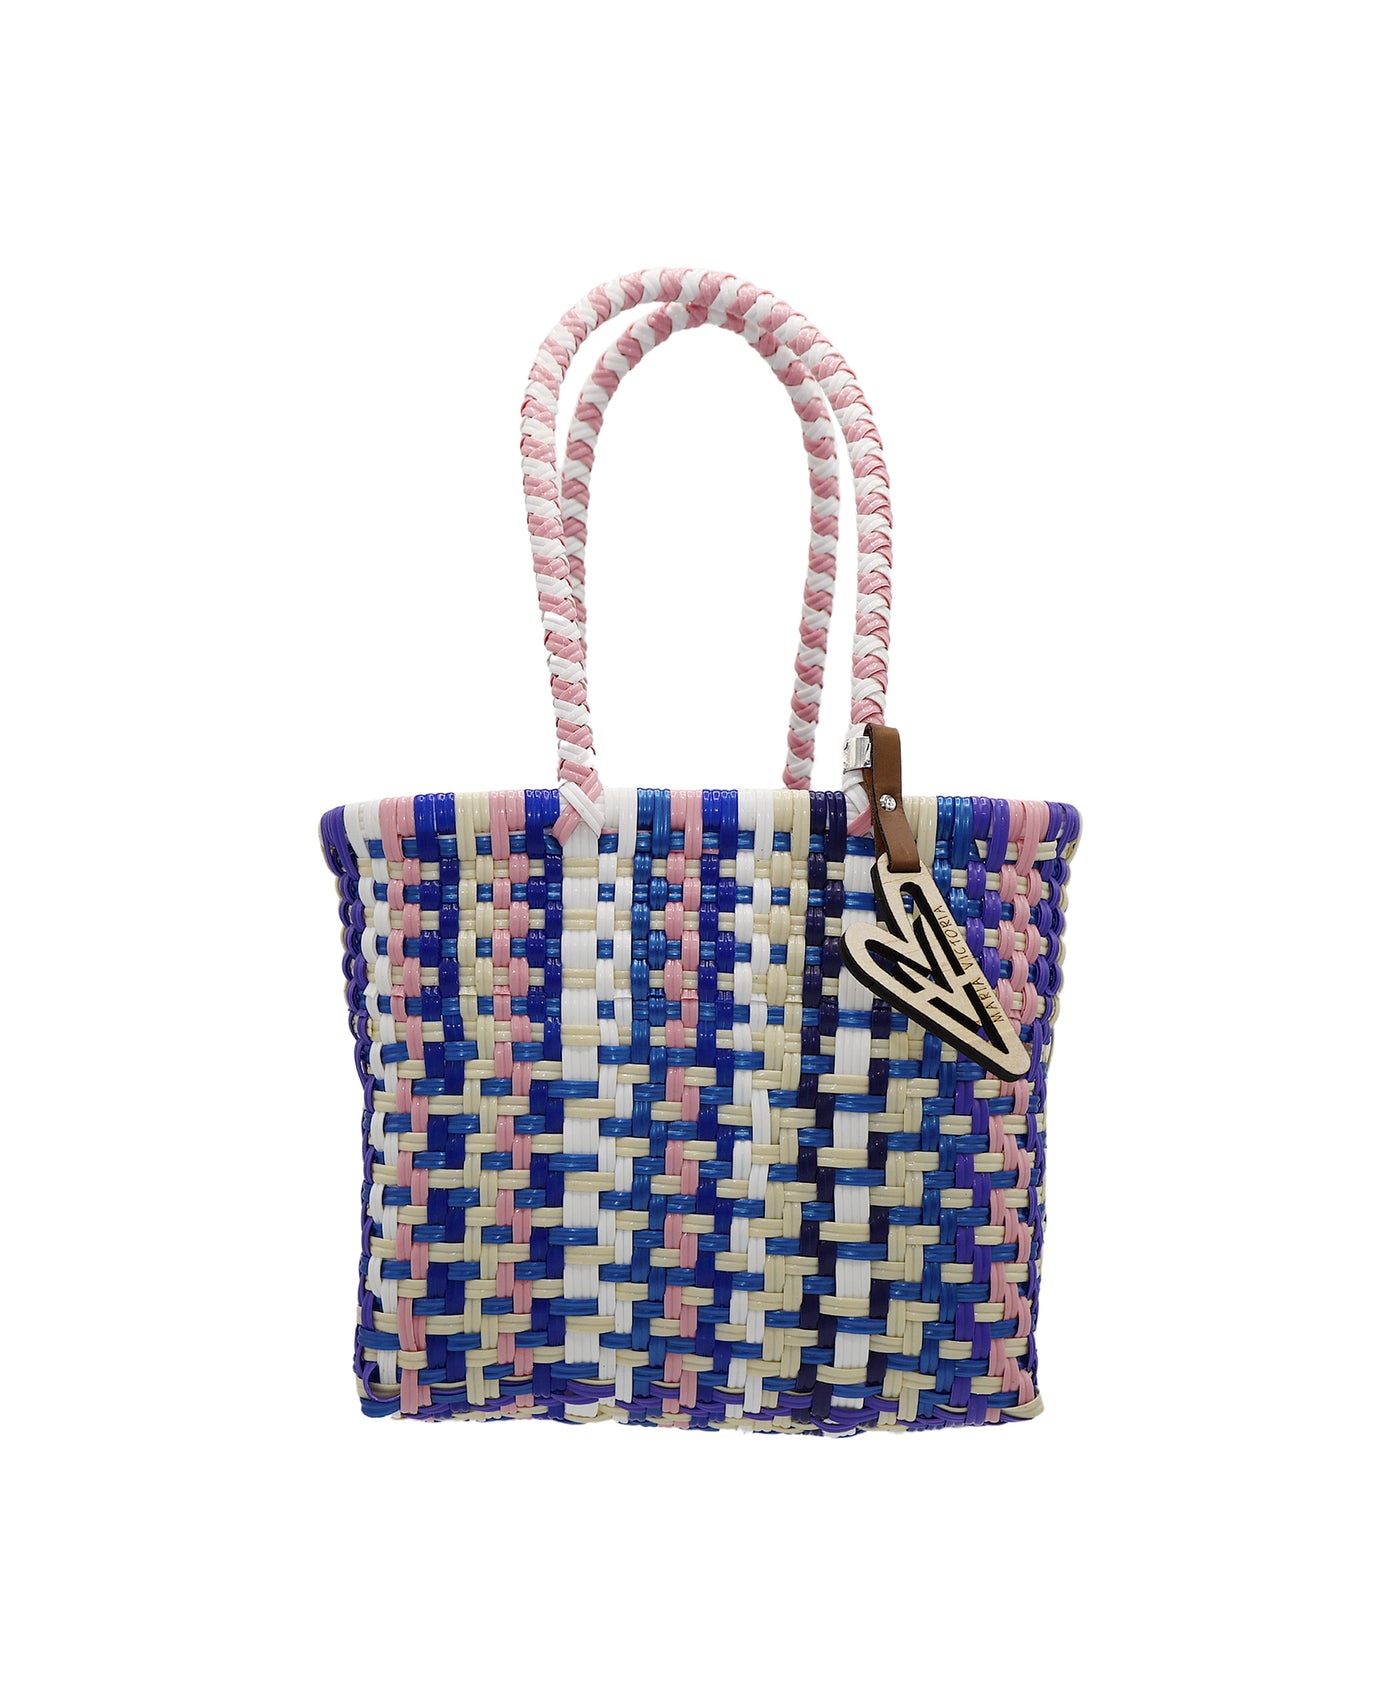 Small Hand-Woven Open Tote image 1